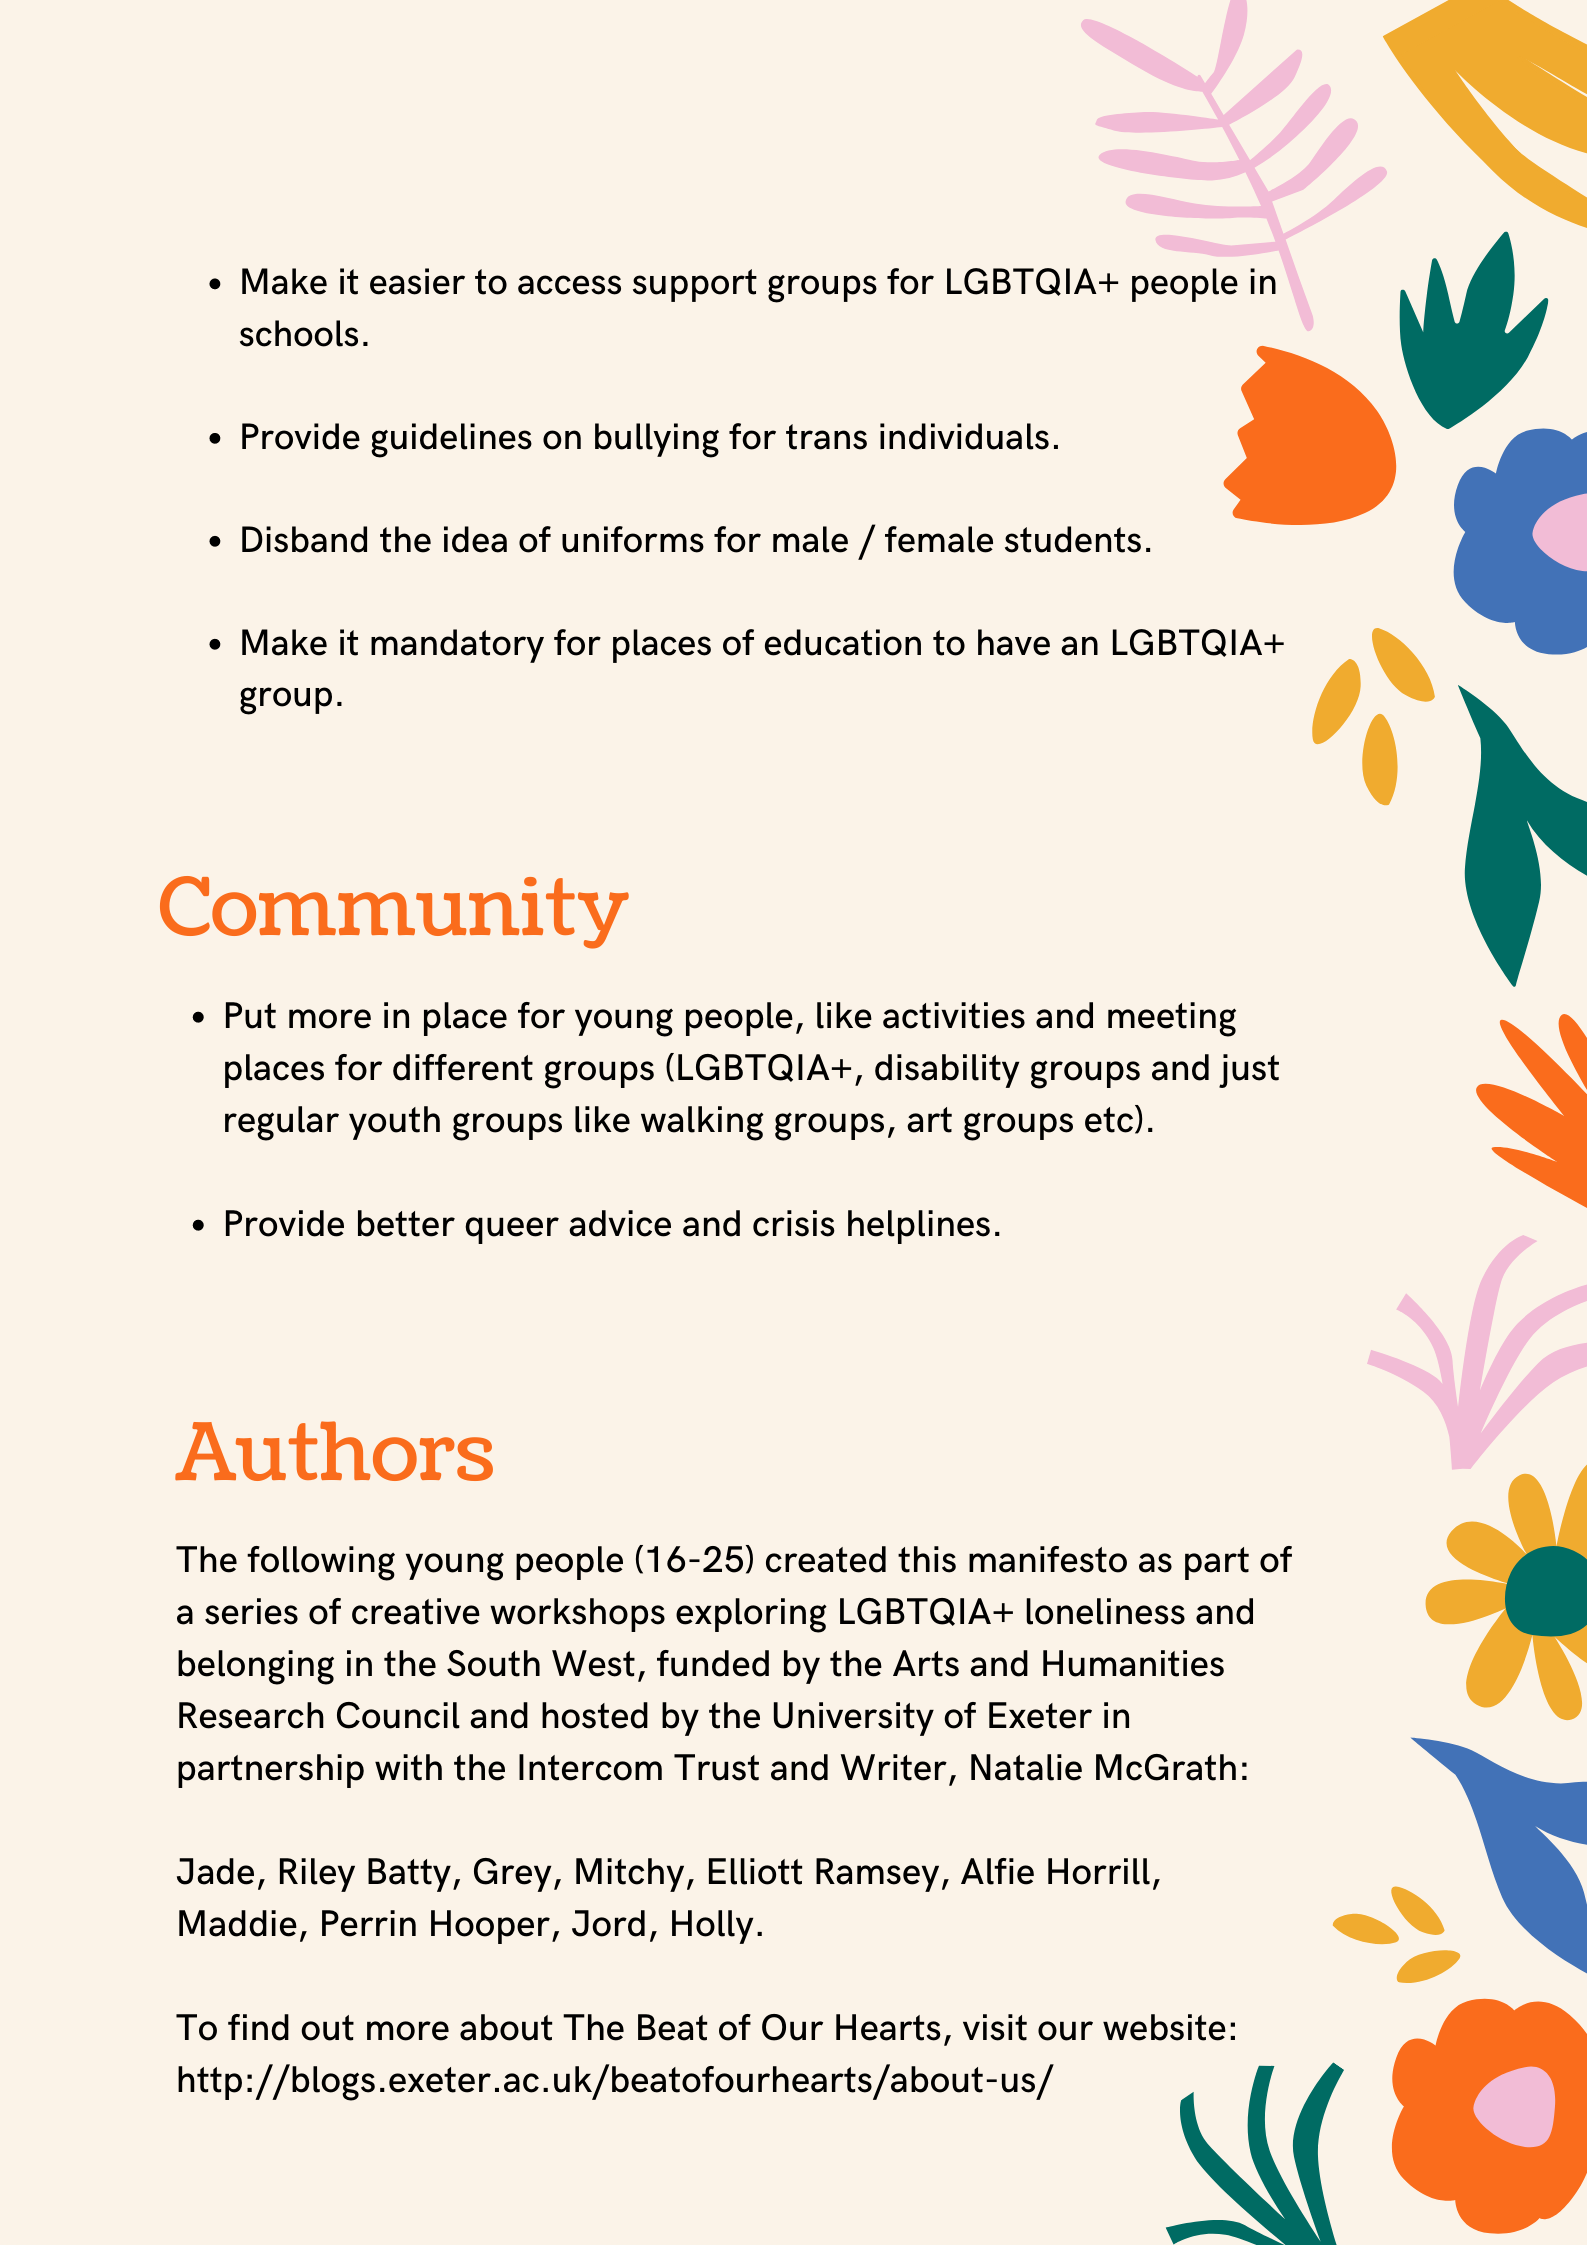 Picture of the manifesto, with a peach background and block colour flowers down the left-hand side. The Beat of Our Hearts logo is in the top left-hand corner. The manifesto is in two pages. The second page continues education but also has a theme of community. Information about the authors of the manifesto is also on this page.